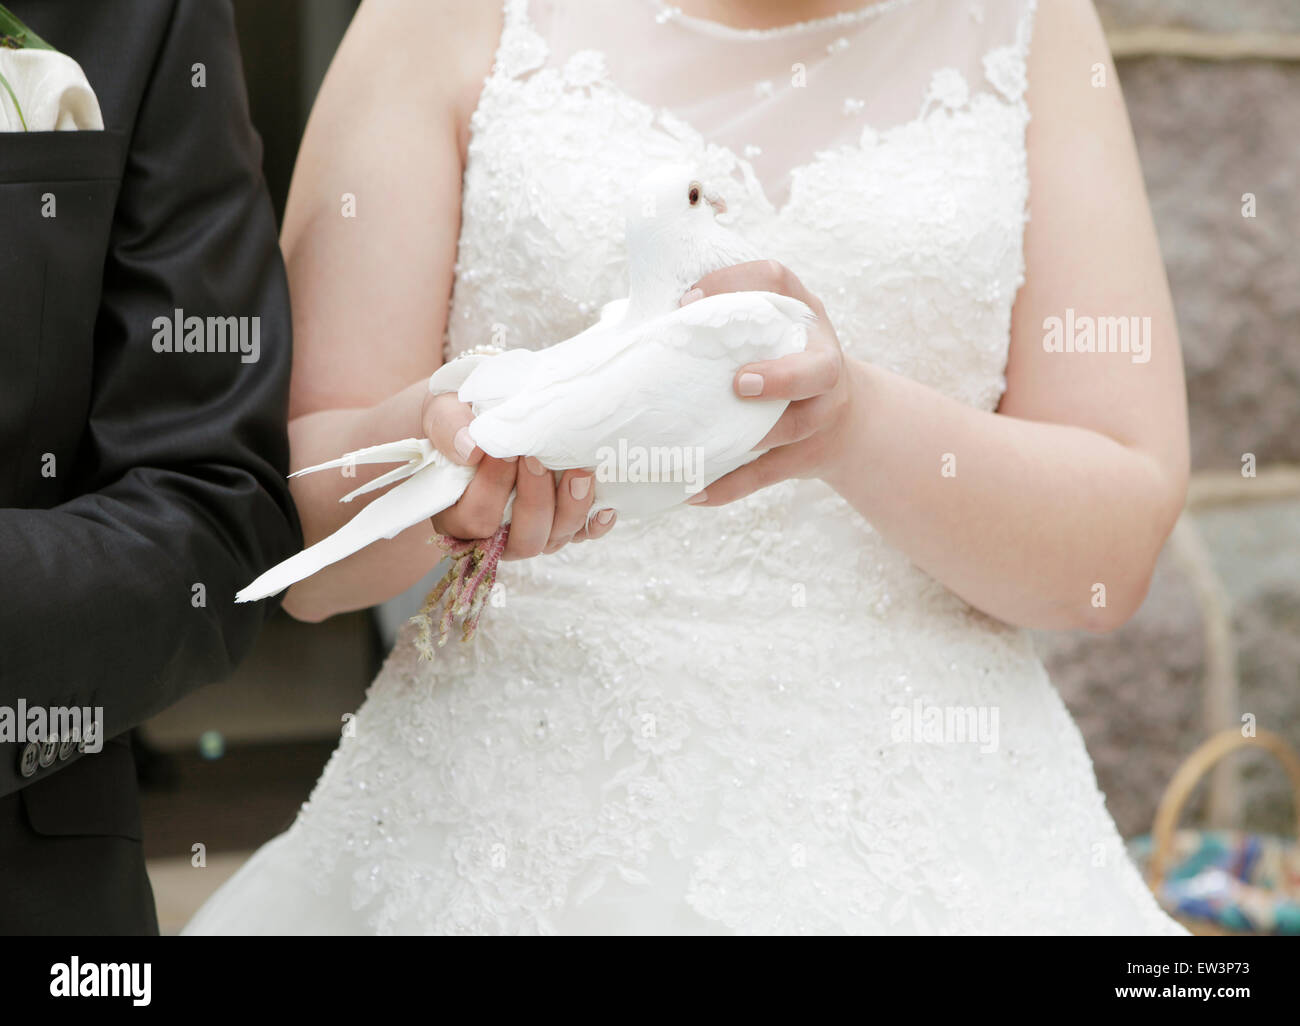 a bride in white wedding dress holding a dove in your hand Stock Photo